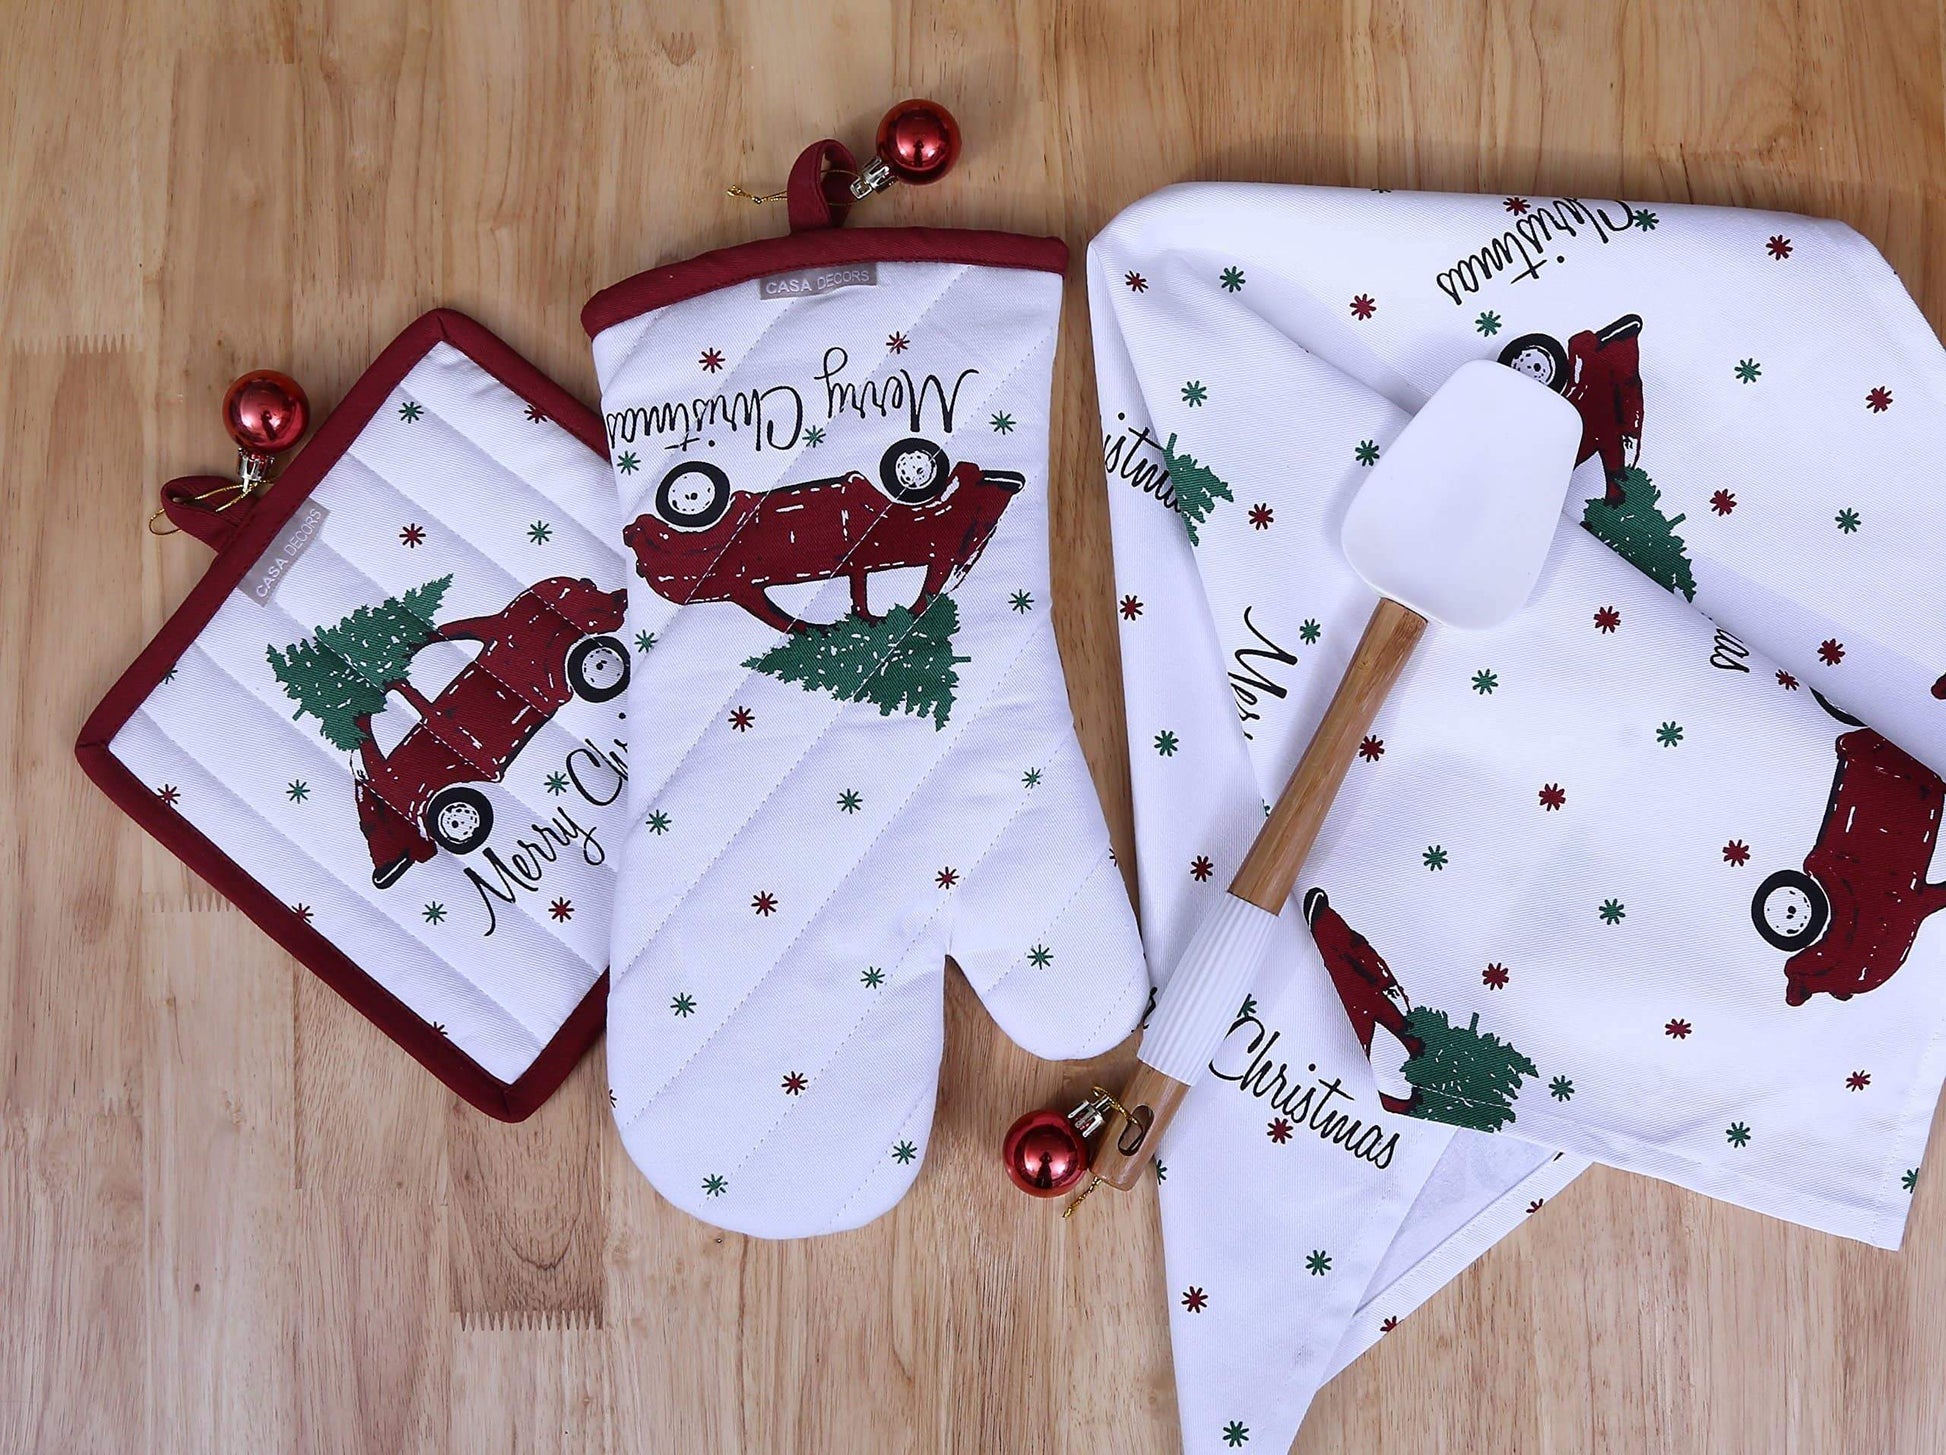 Shop set of apron oven mitt pot holder pair of kitchen towels in a unique merry christmas design made of 100 cotton eco friendly safe value pack and ideal gift set kitchen linen set by casa decors